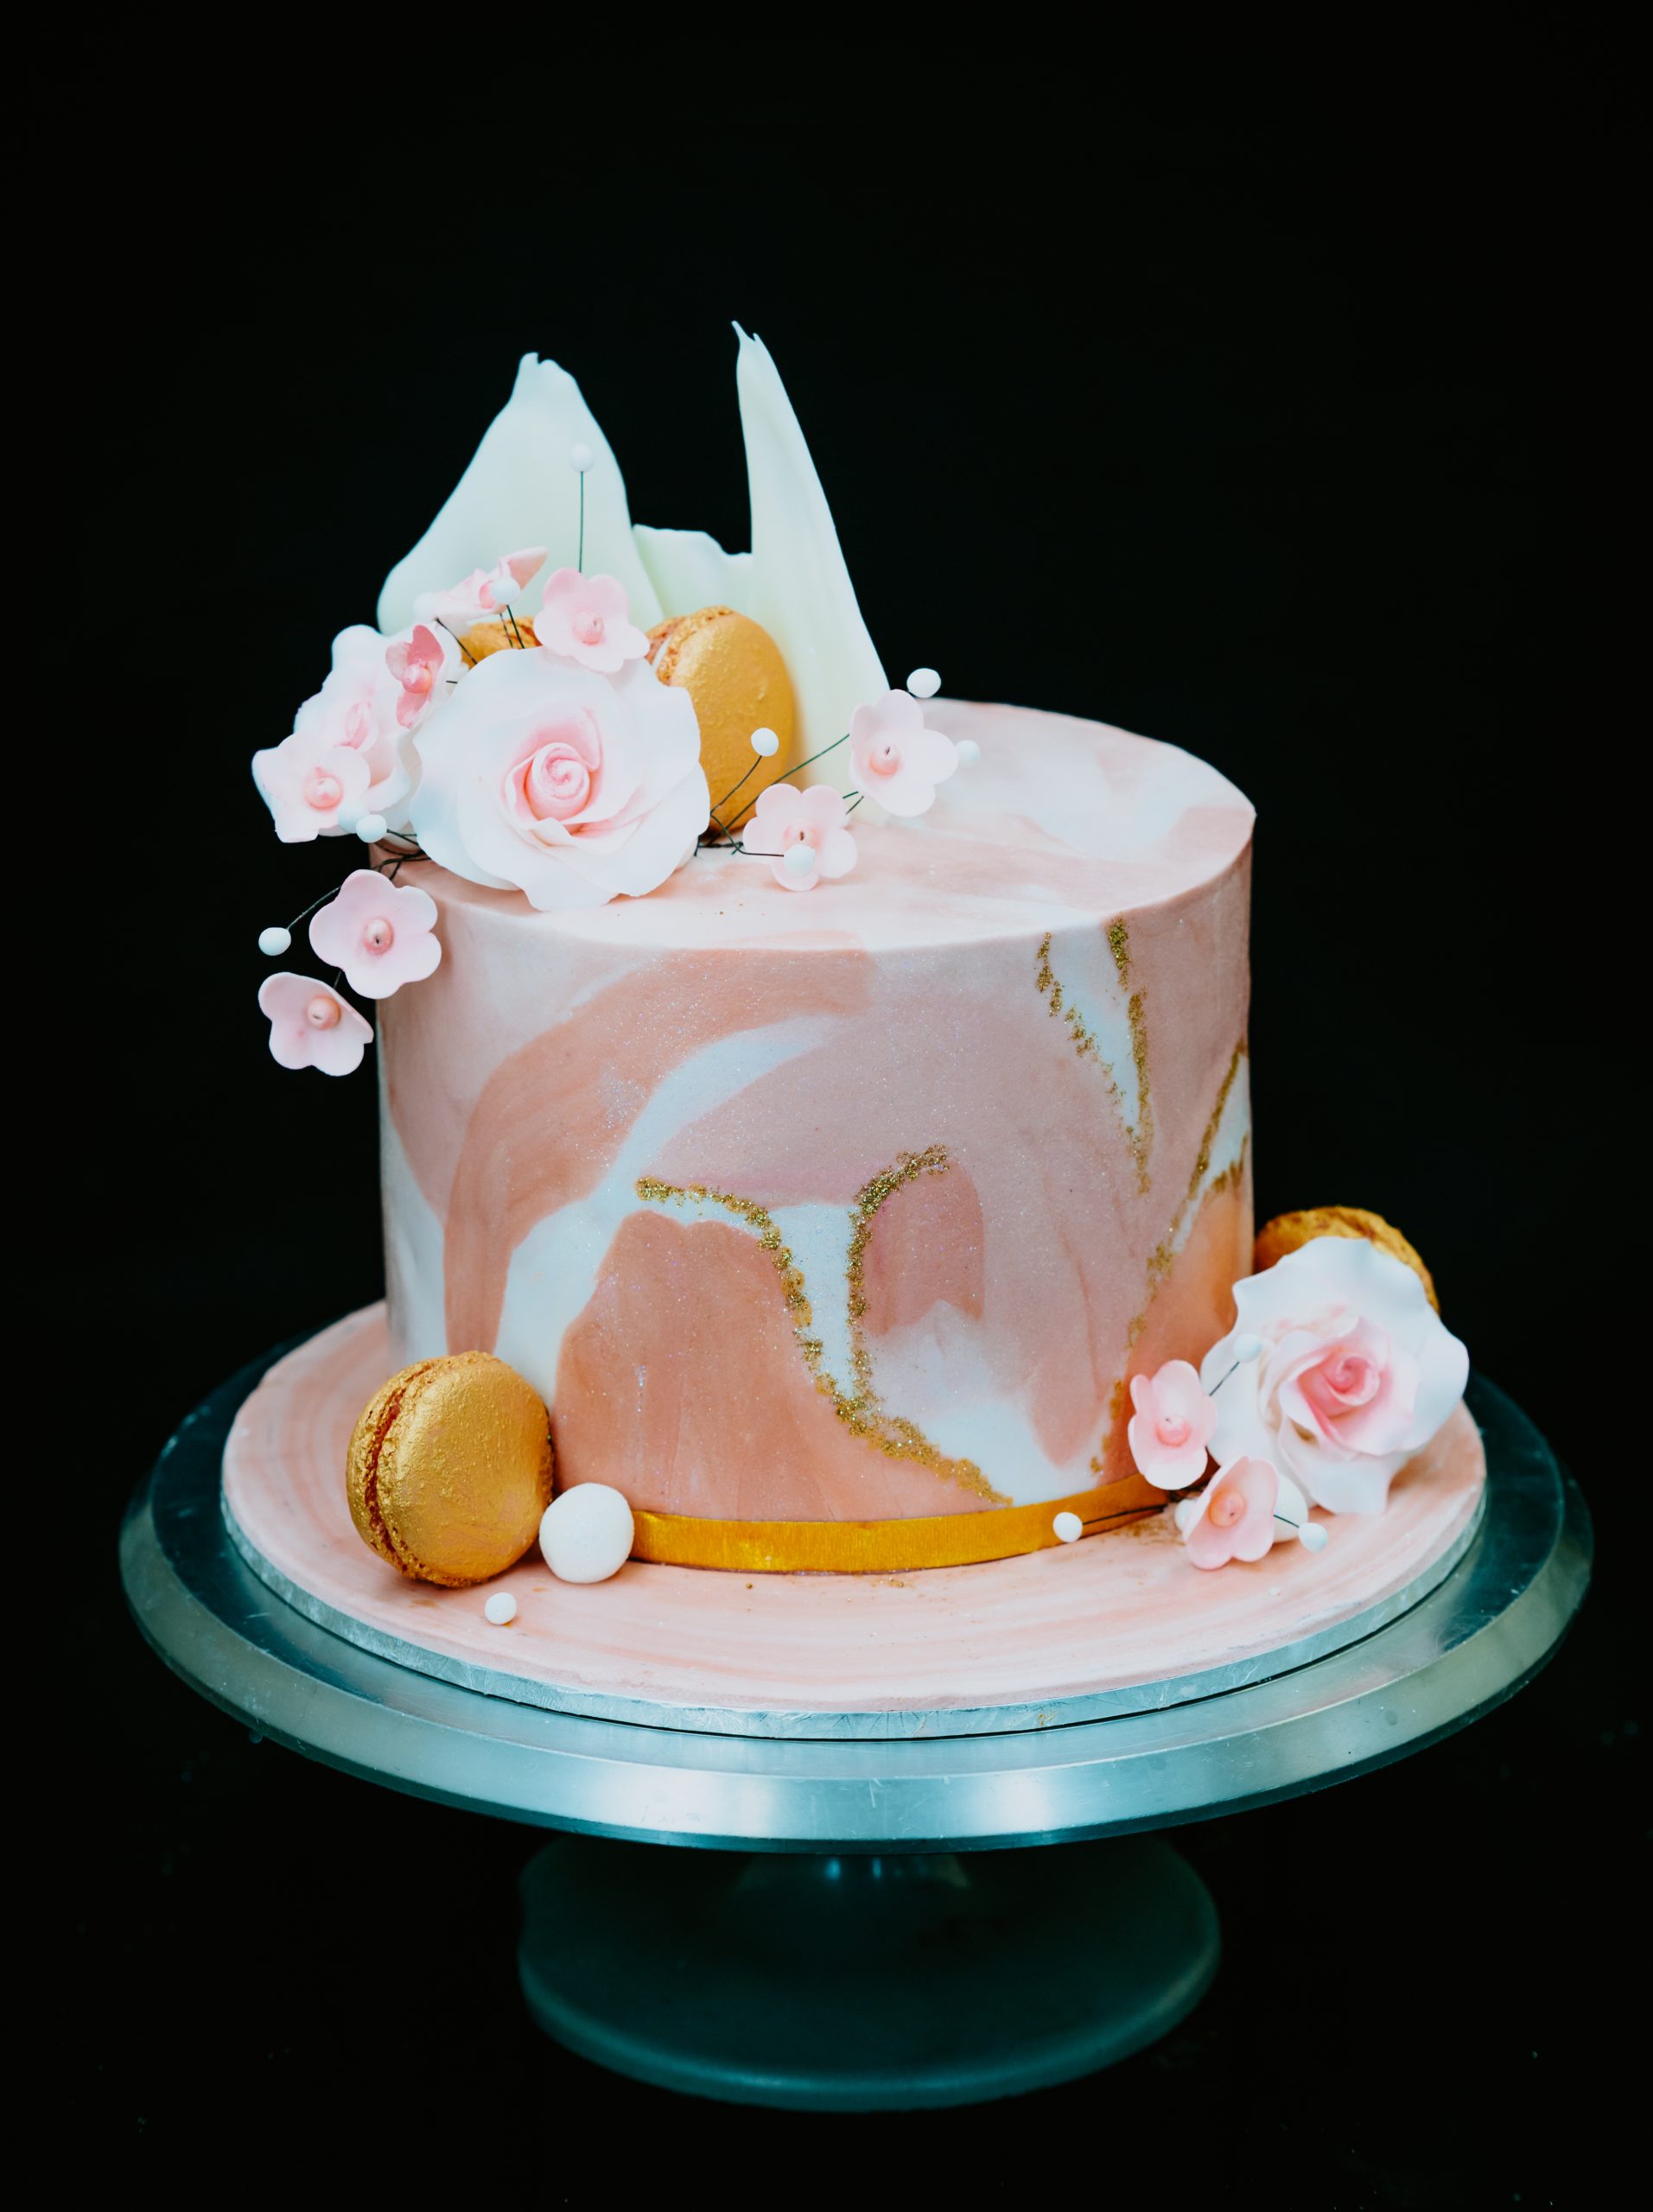 Dollybird Bakes - Happy 40th Birthday Emma! Beautiful pink marble cake,  with edible gold accents. Macarons, meringues and sweet treats to dress.  Can you spot the #hinch items too?! Colours: @colour.mill Topper : @